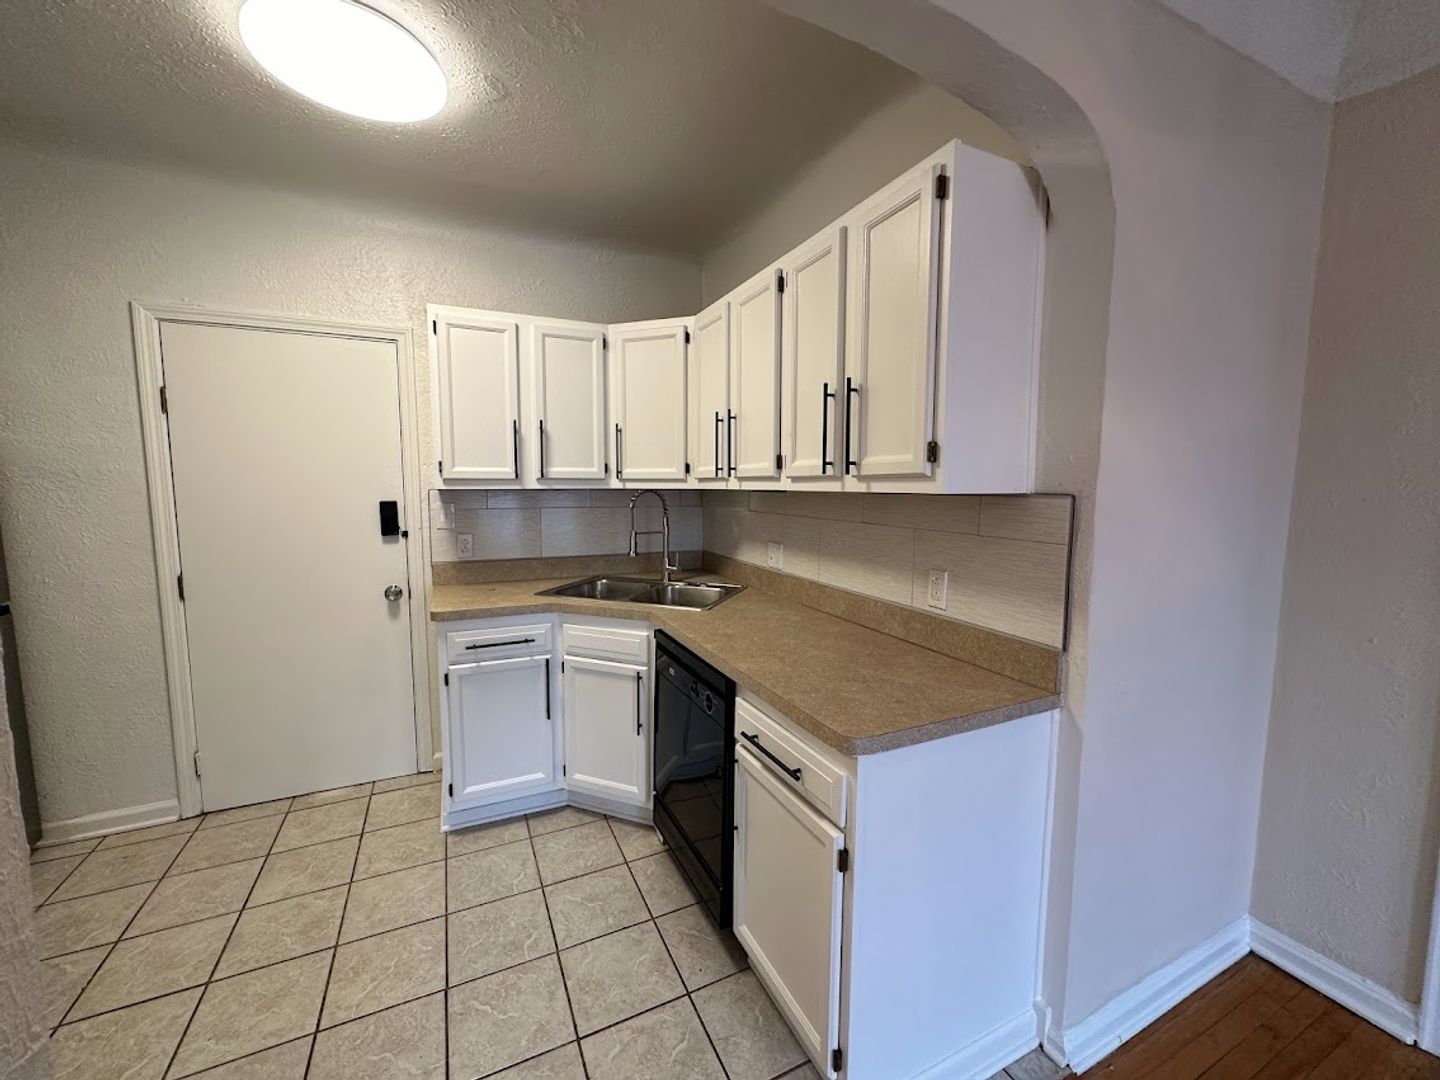 1 Bed & 1 Bath Apartment Unit for Rent | Cleveland Heights | Ohio #44118 Image